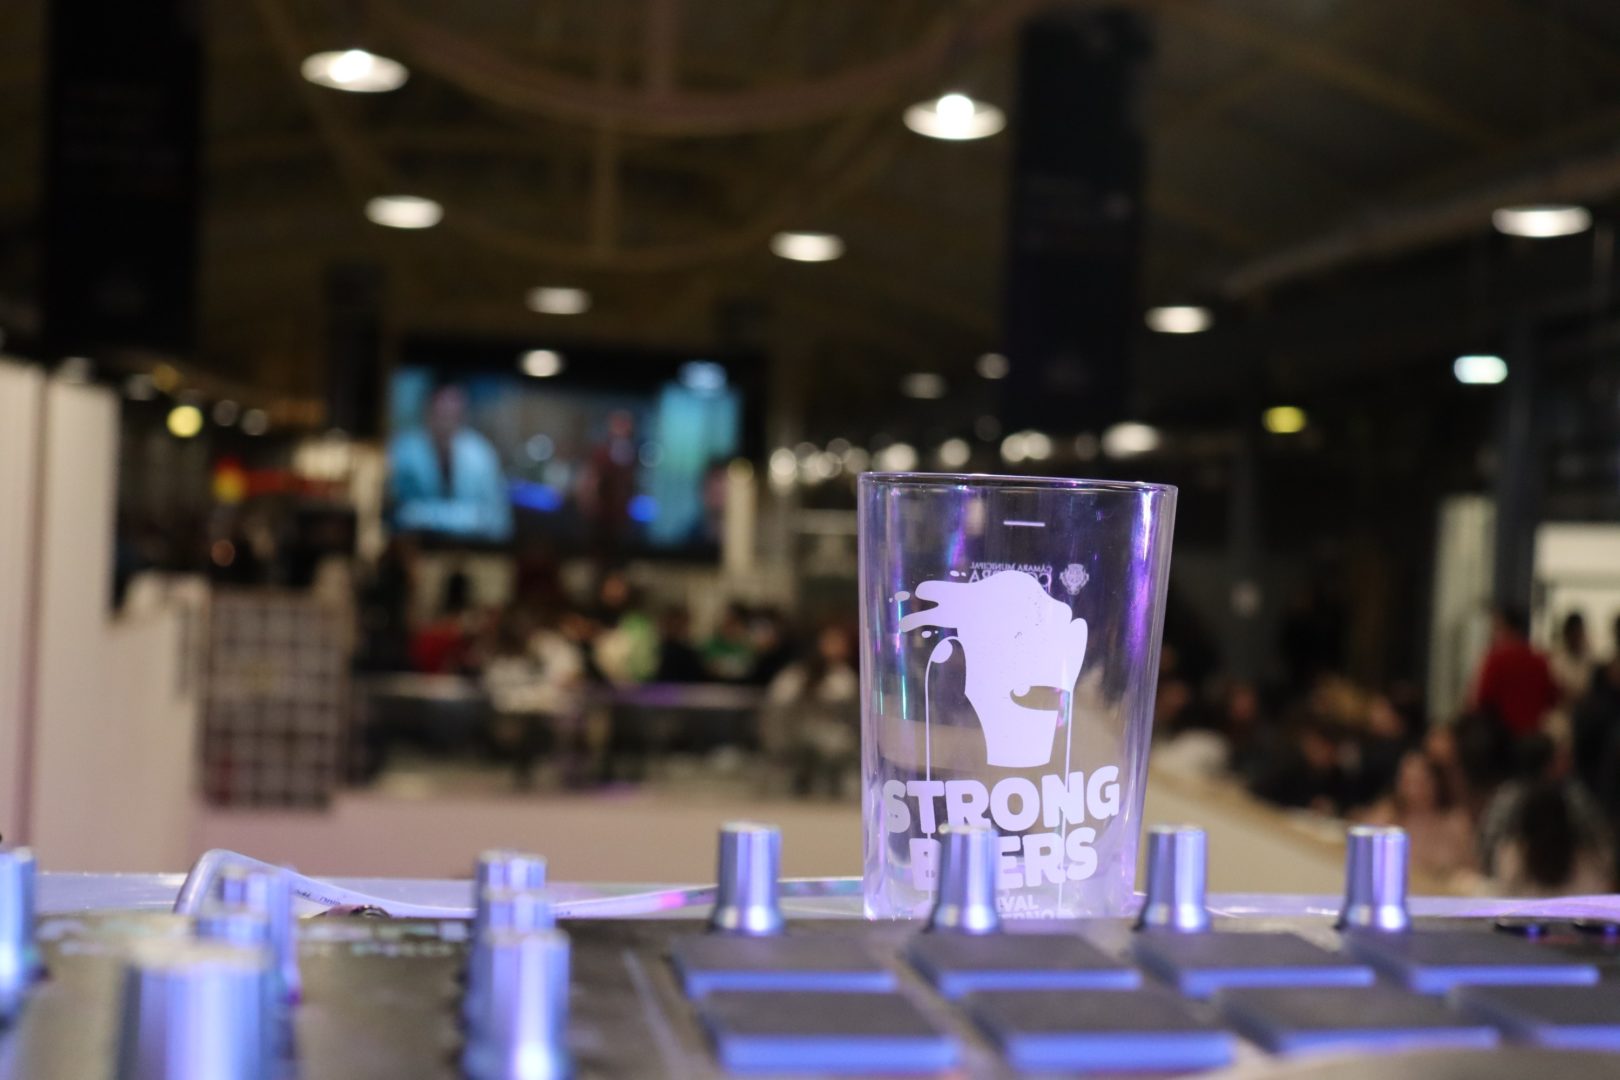 Strong Beers - Winter's Festival